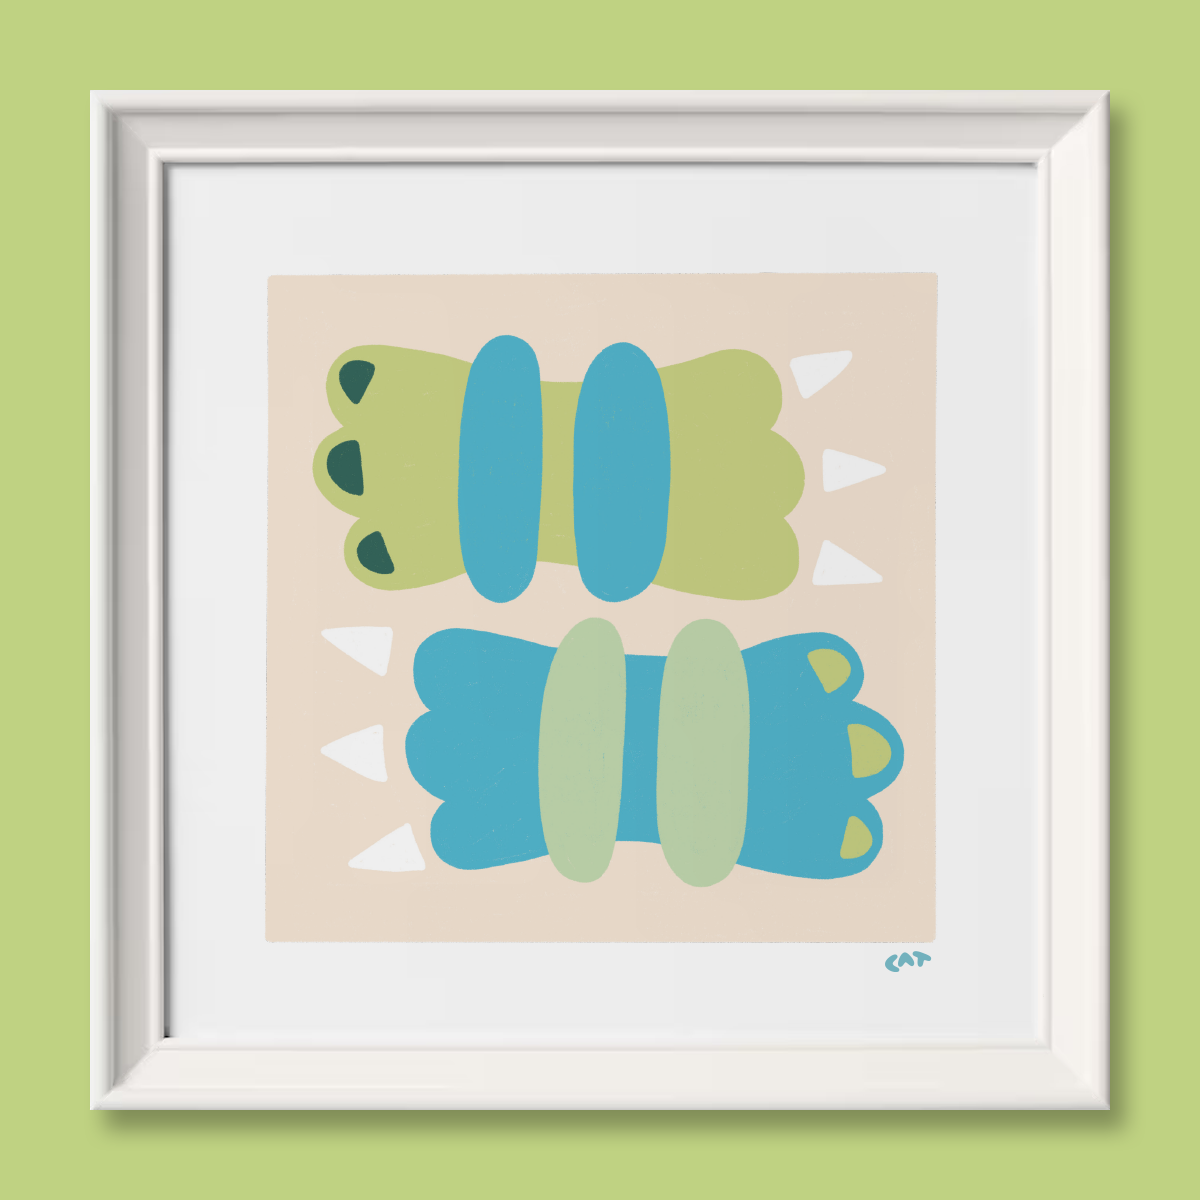 White framed print of two claw like shapes in shades of green and blue. Each claw like shape has pointed white toenails and all the shapes sit on top of a beige square.